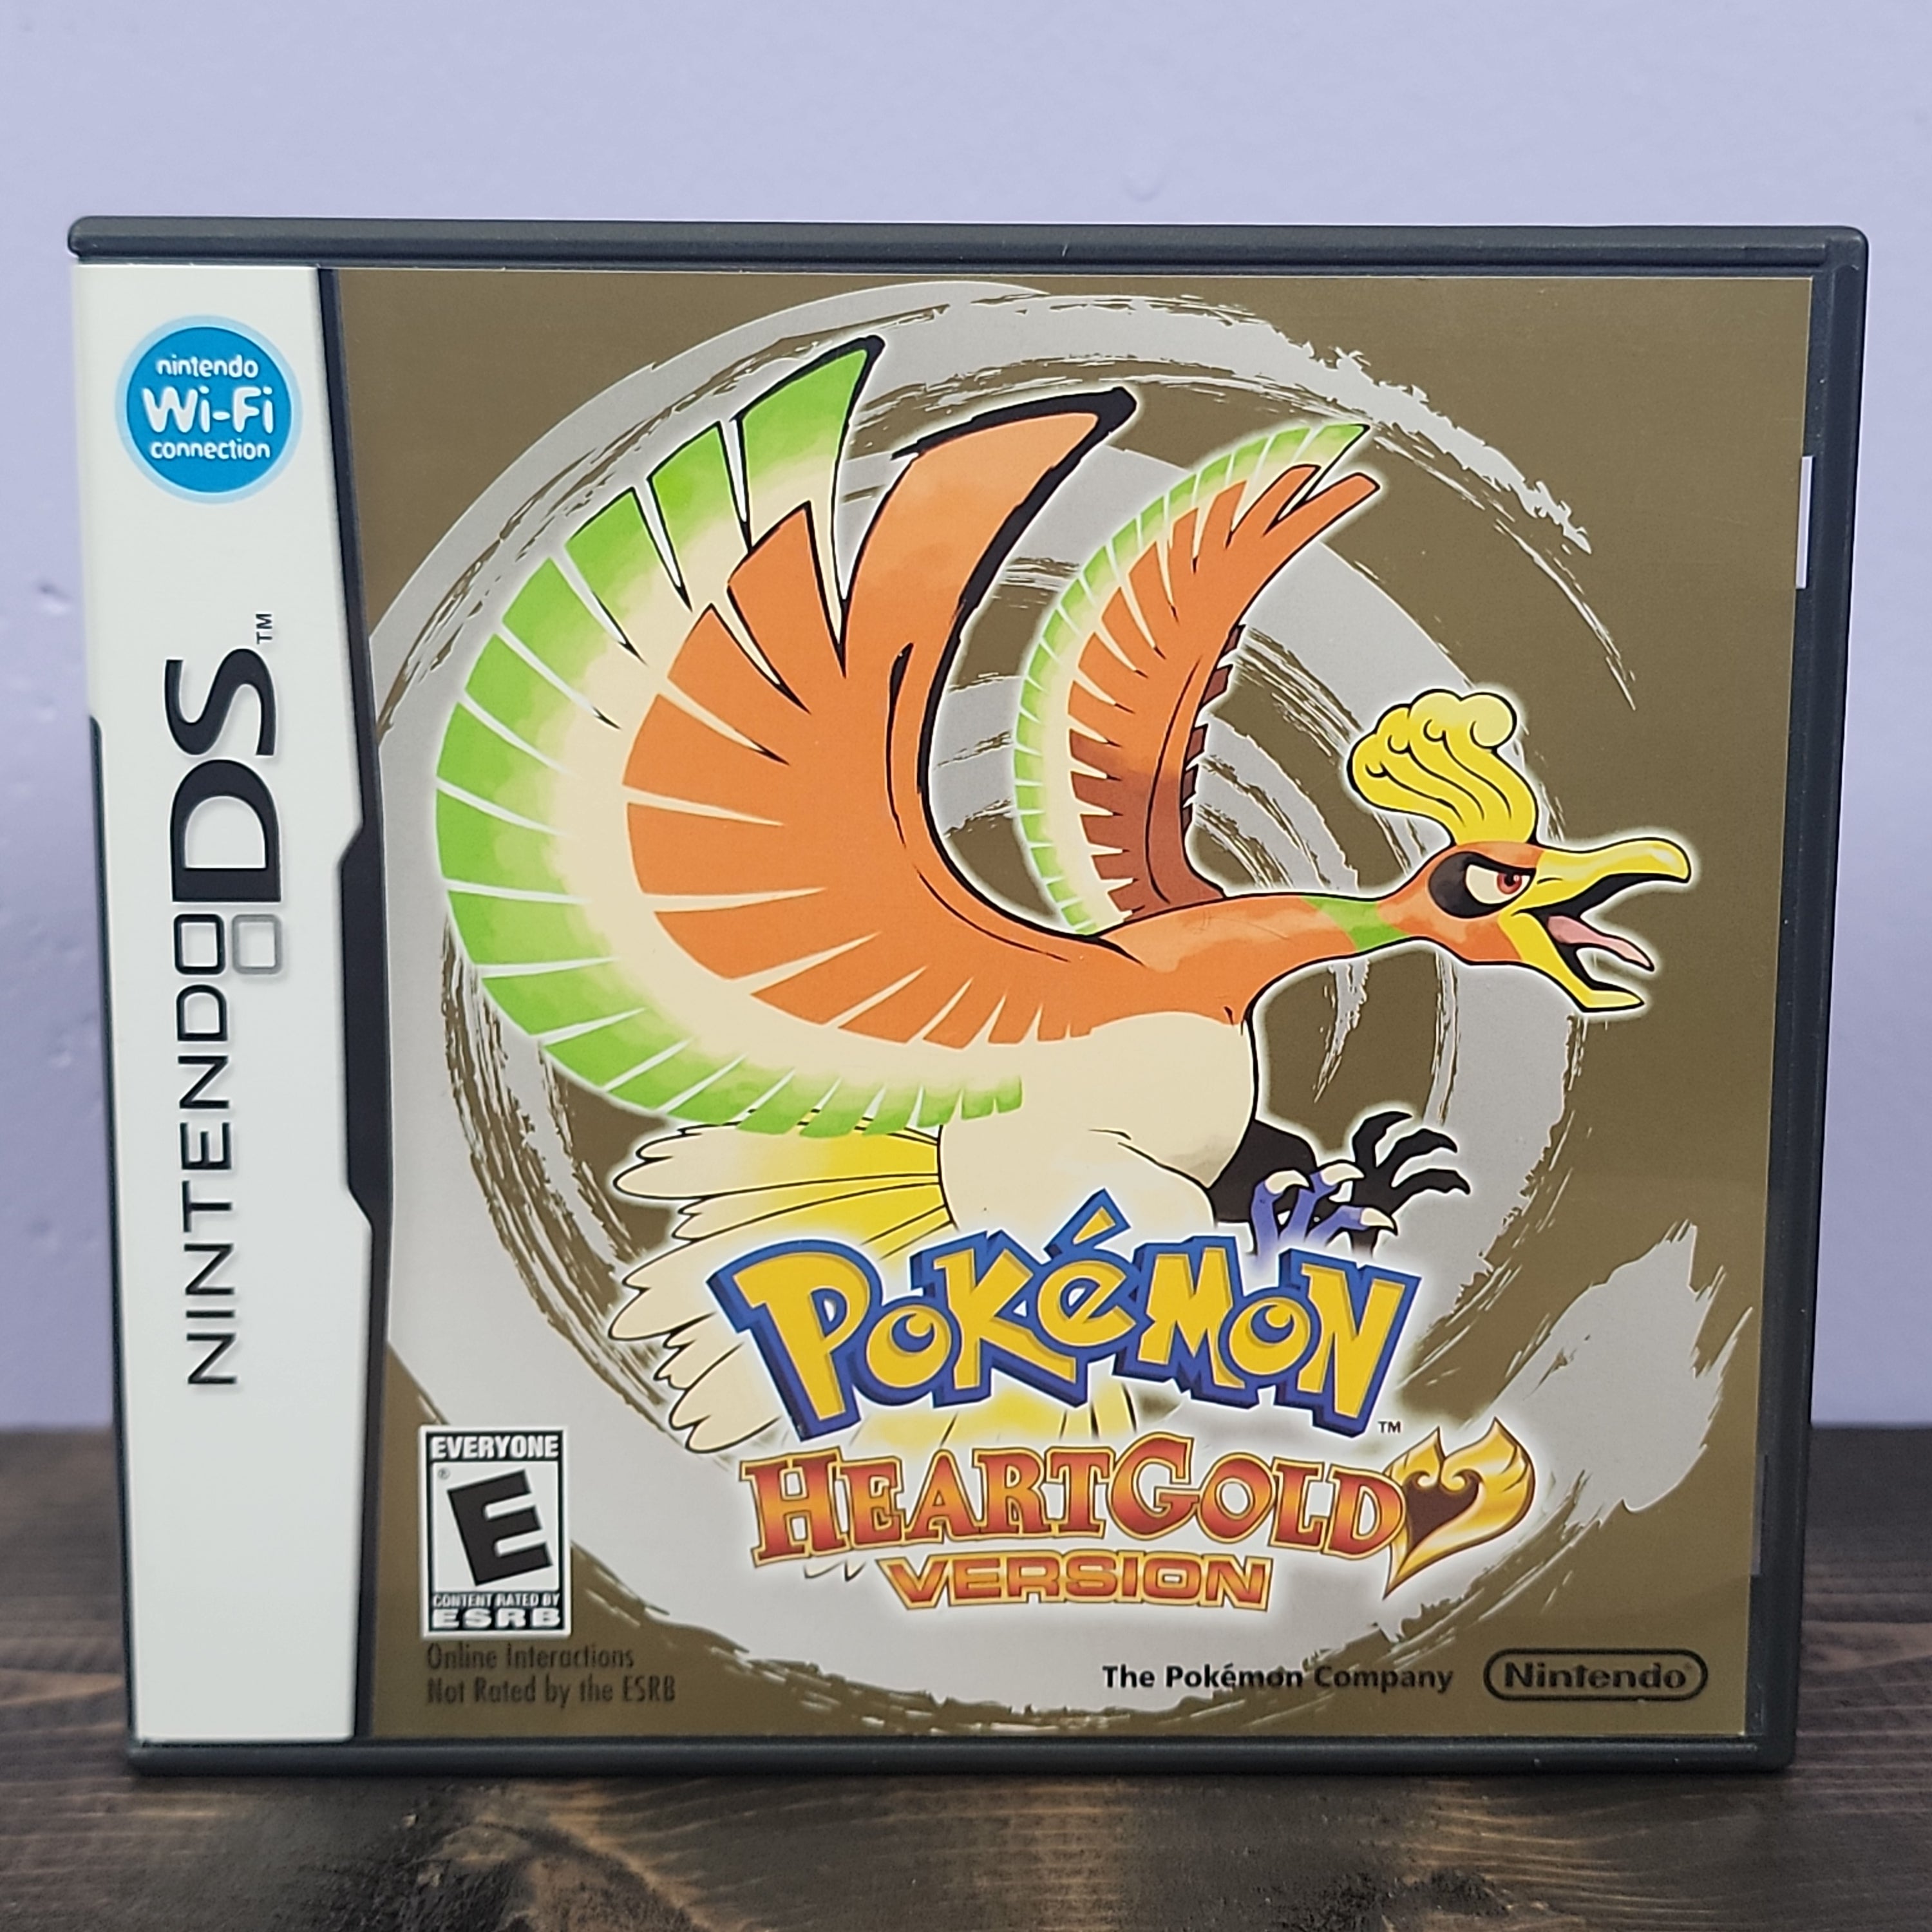 Pokemon Heartgold cheats   - The Independent Video